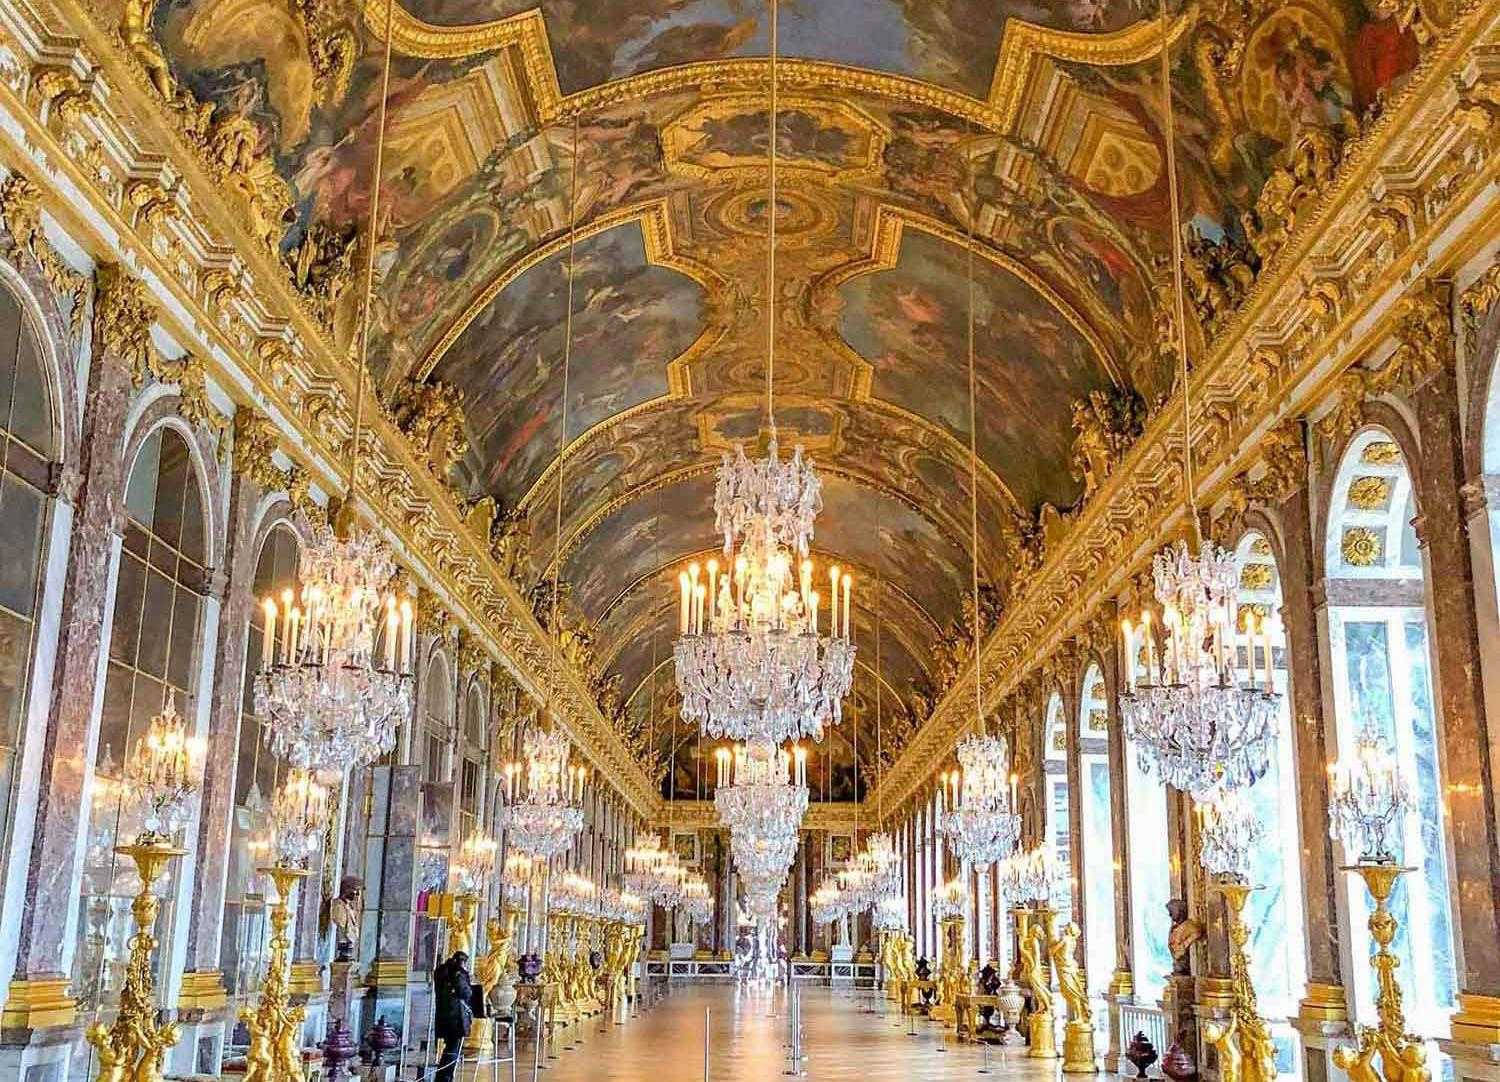 Inside The Hall Of Mirrors In The Palace Of Versailles Wallpaper